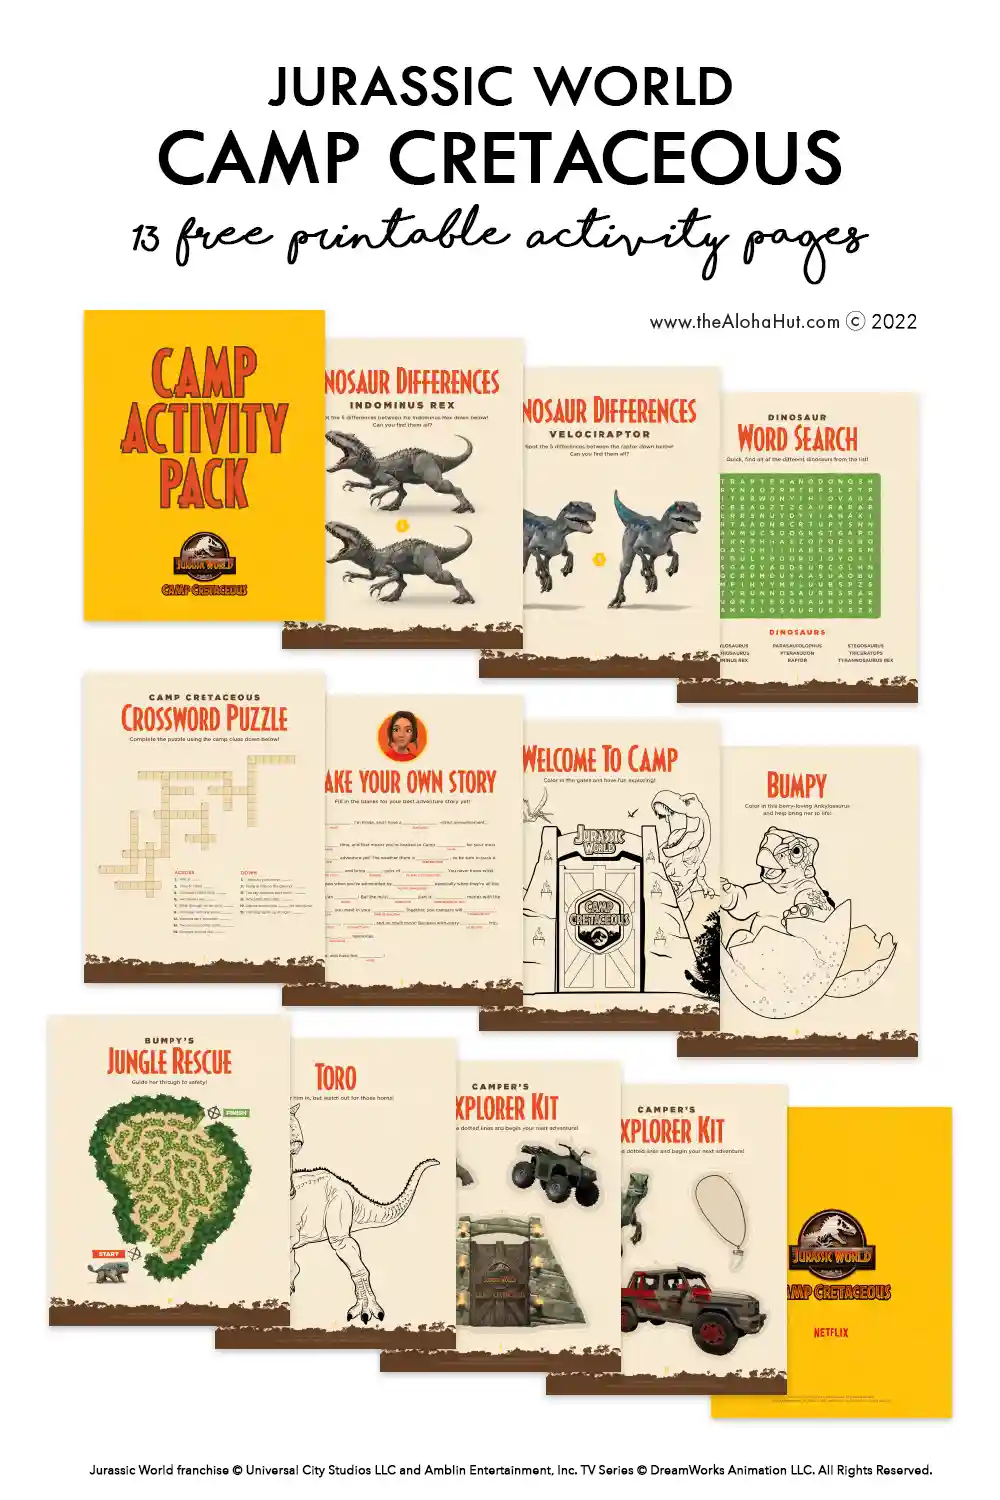 Jurassic World Camp Cretaceous Party Ideas - Dinosaur Party Ideas - free printable party decor & games - activity pages